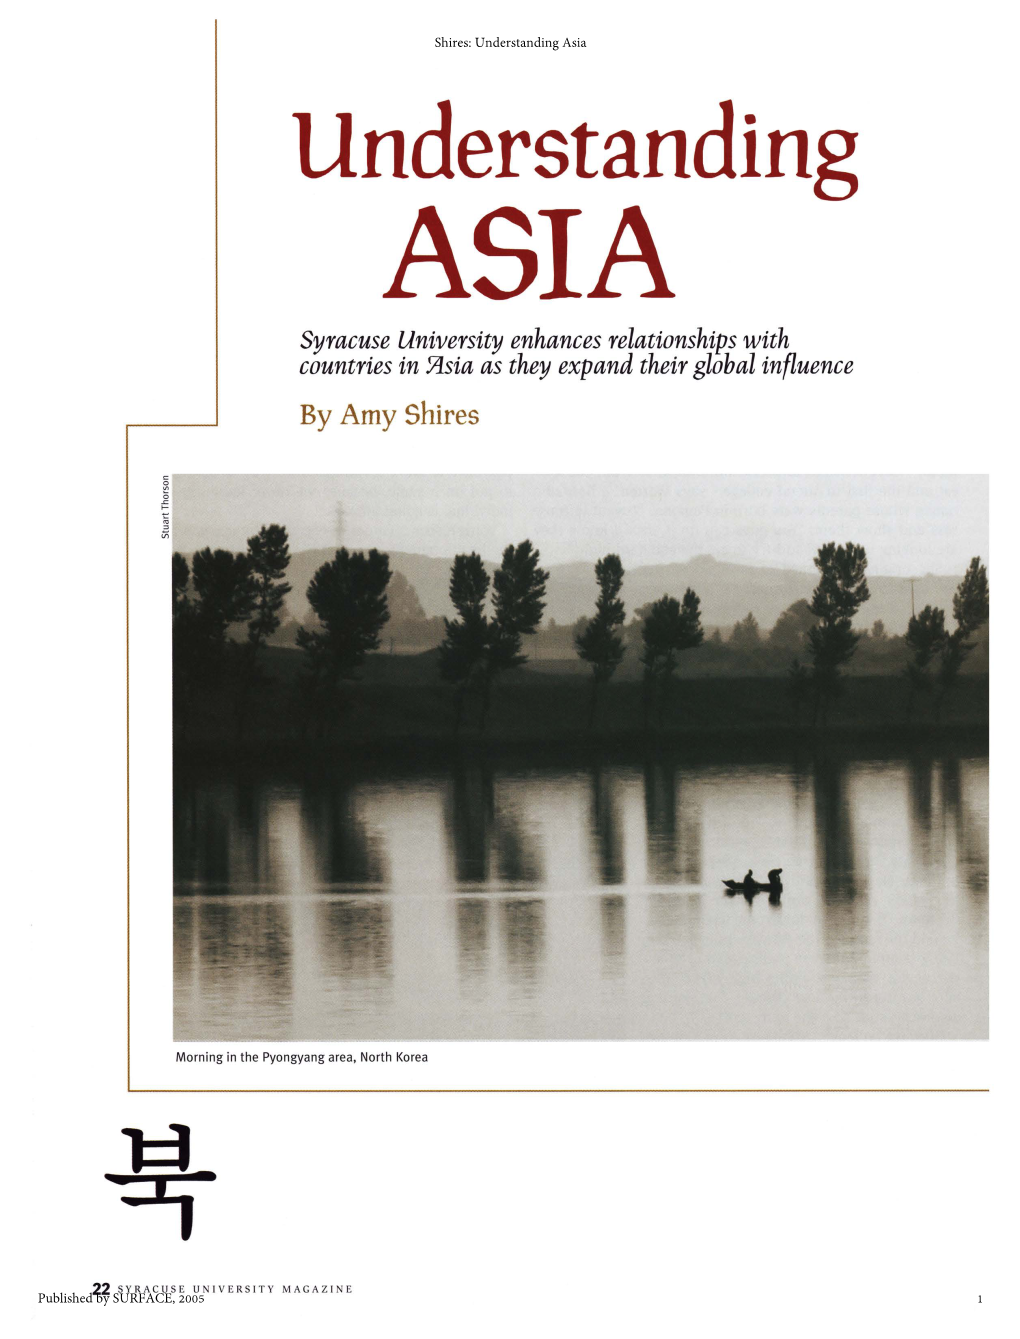 Understanding Asia Understanding ASIA Syracuse University Enhances Relationships with Countries in 91Sia As They Expand Their Global Influence by Amy Shires